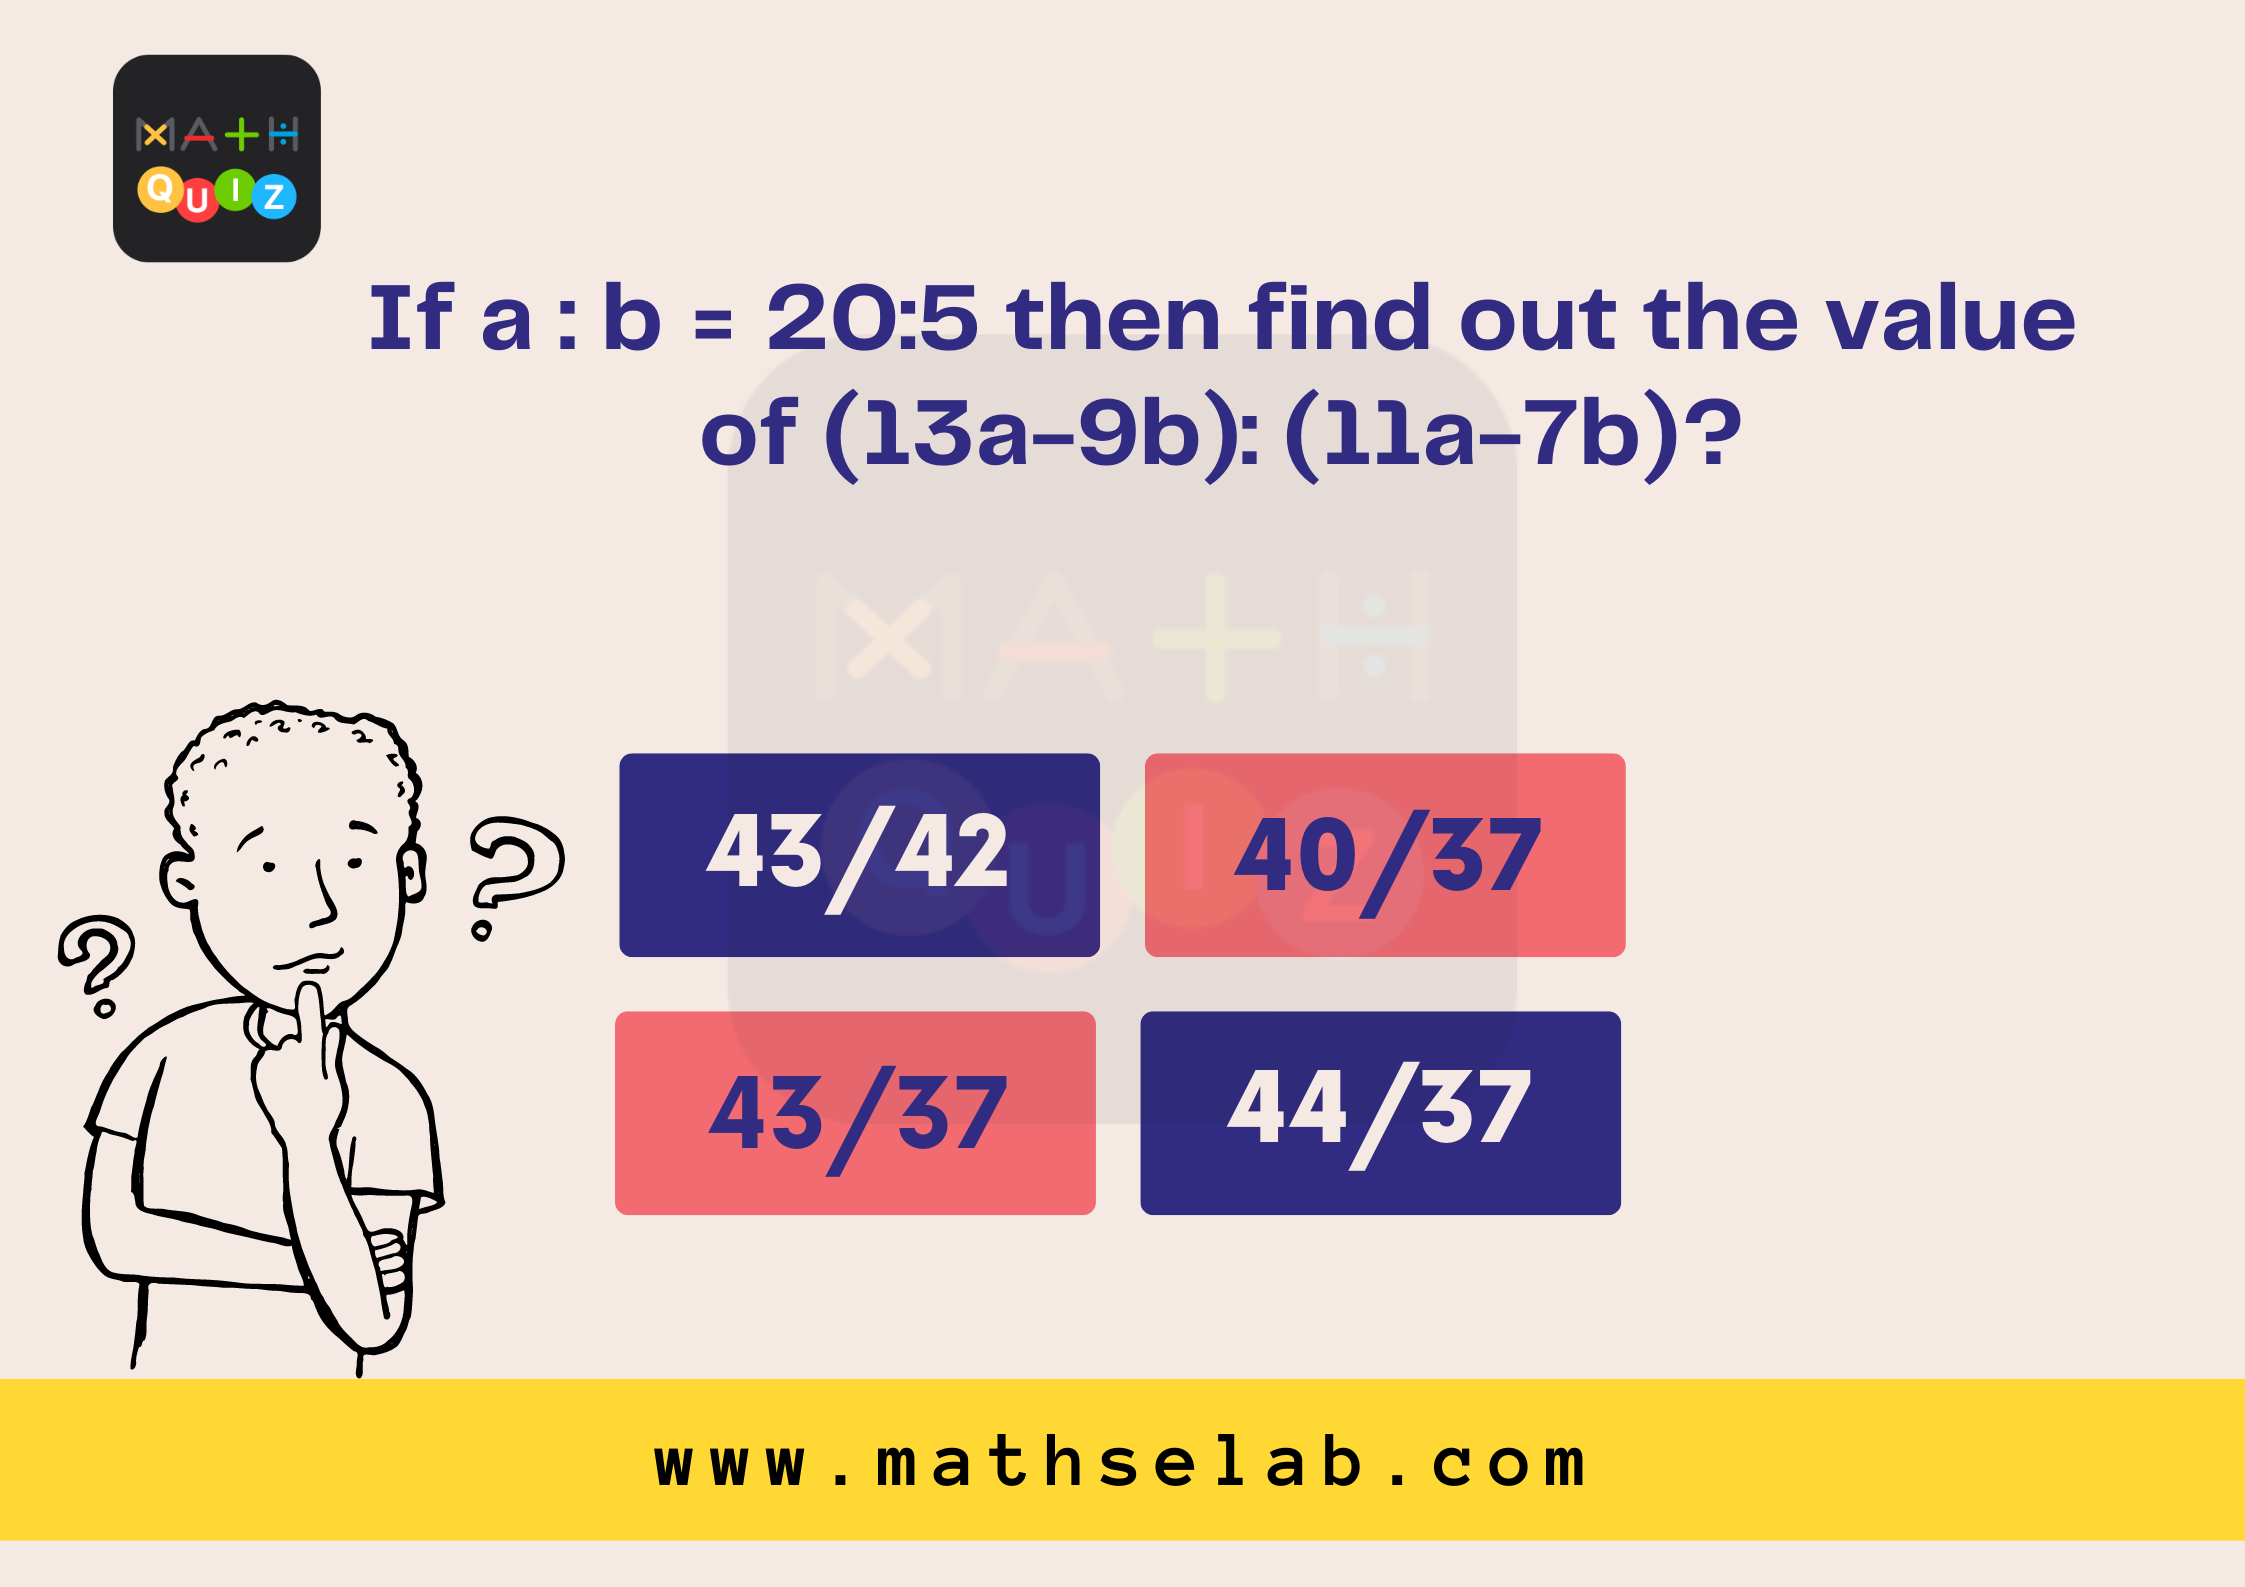 If a : b = 20:5 then find out the value of (13a-9b): (11a-7b)?